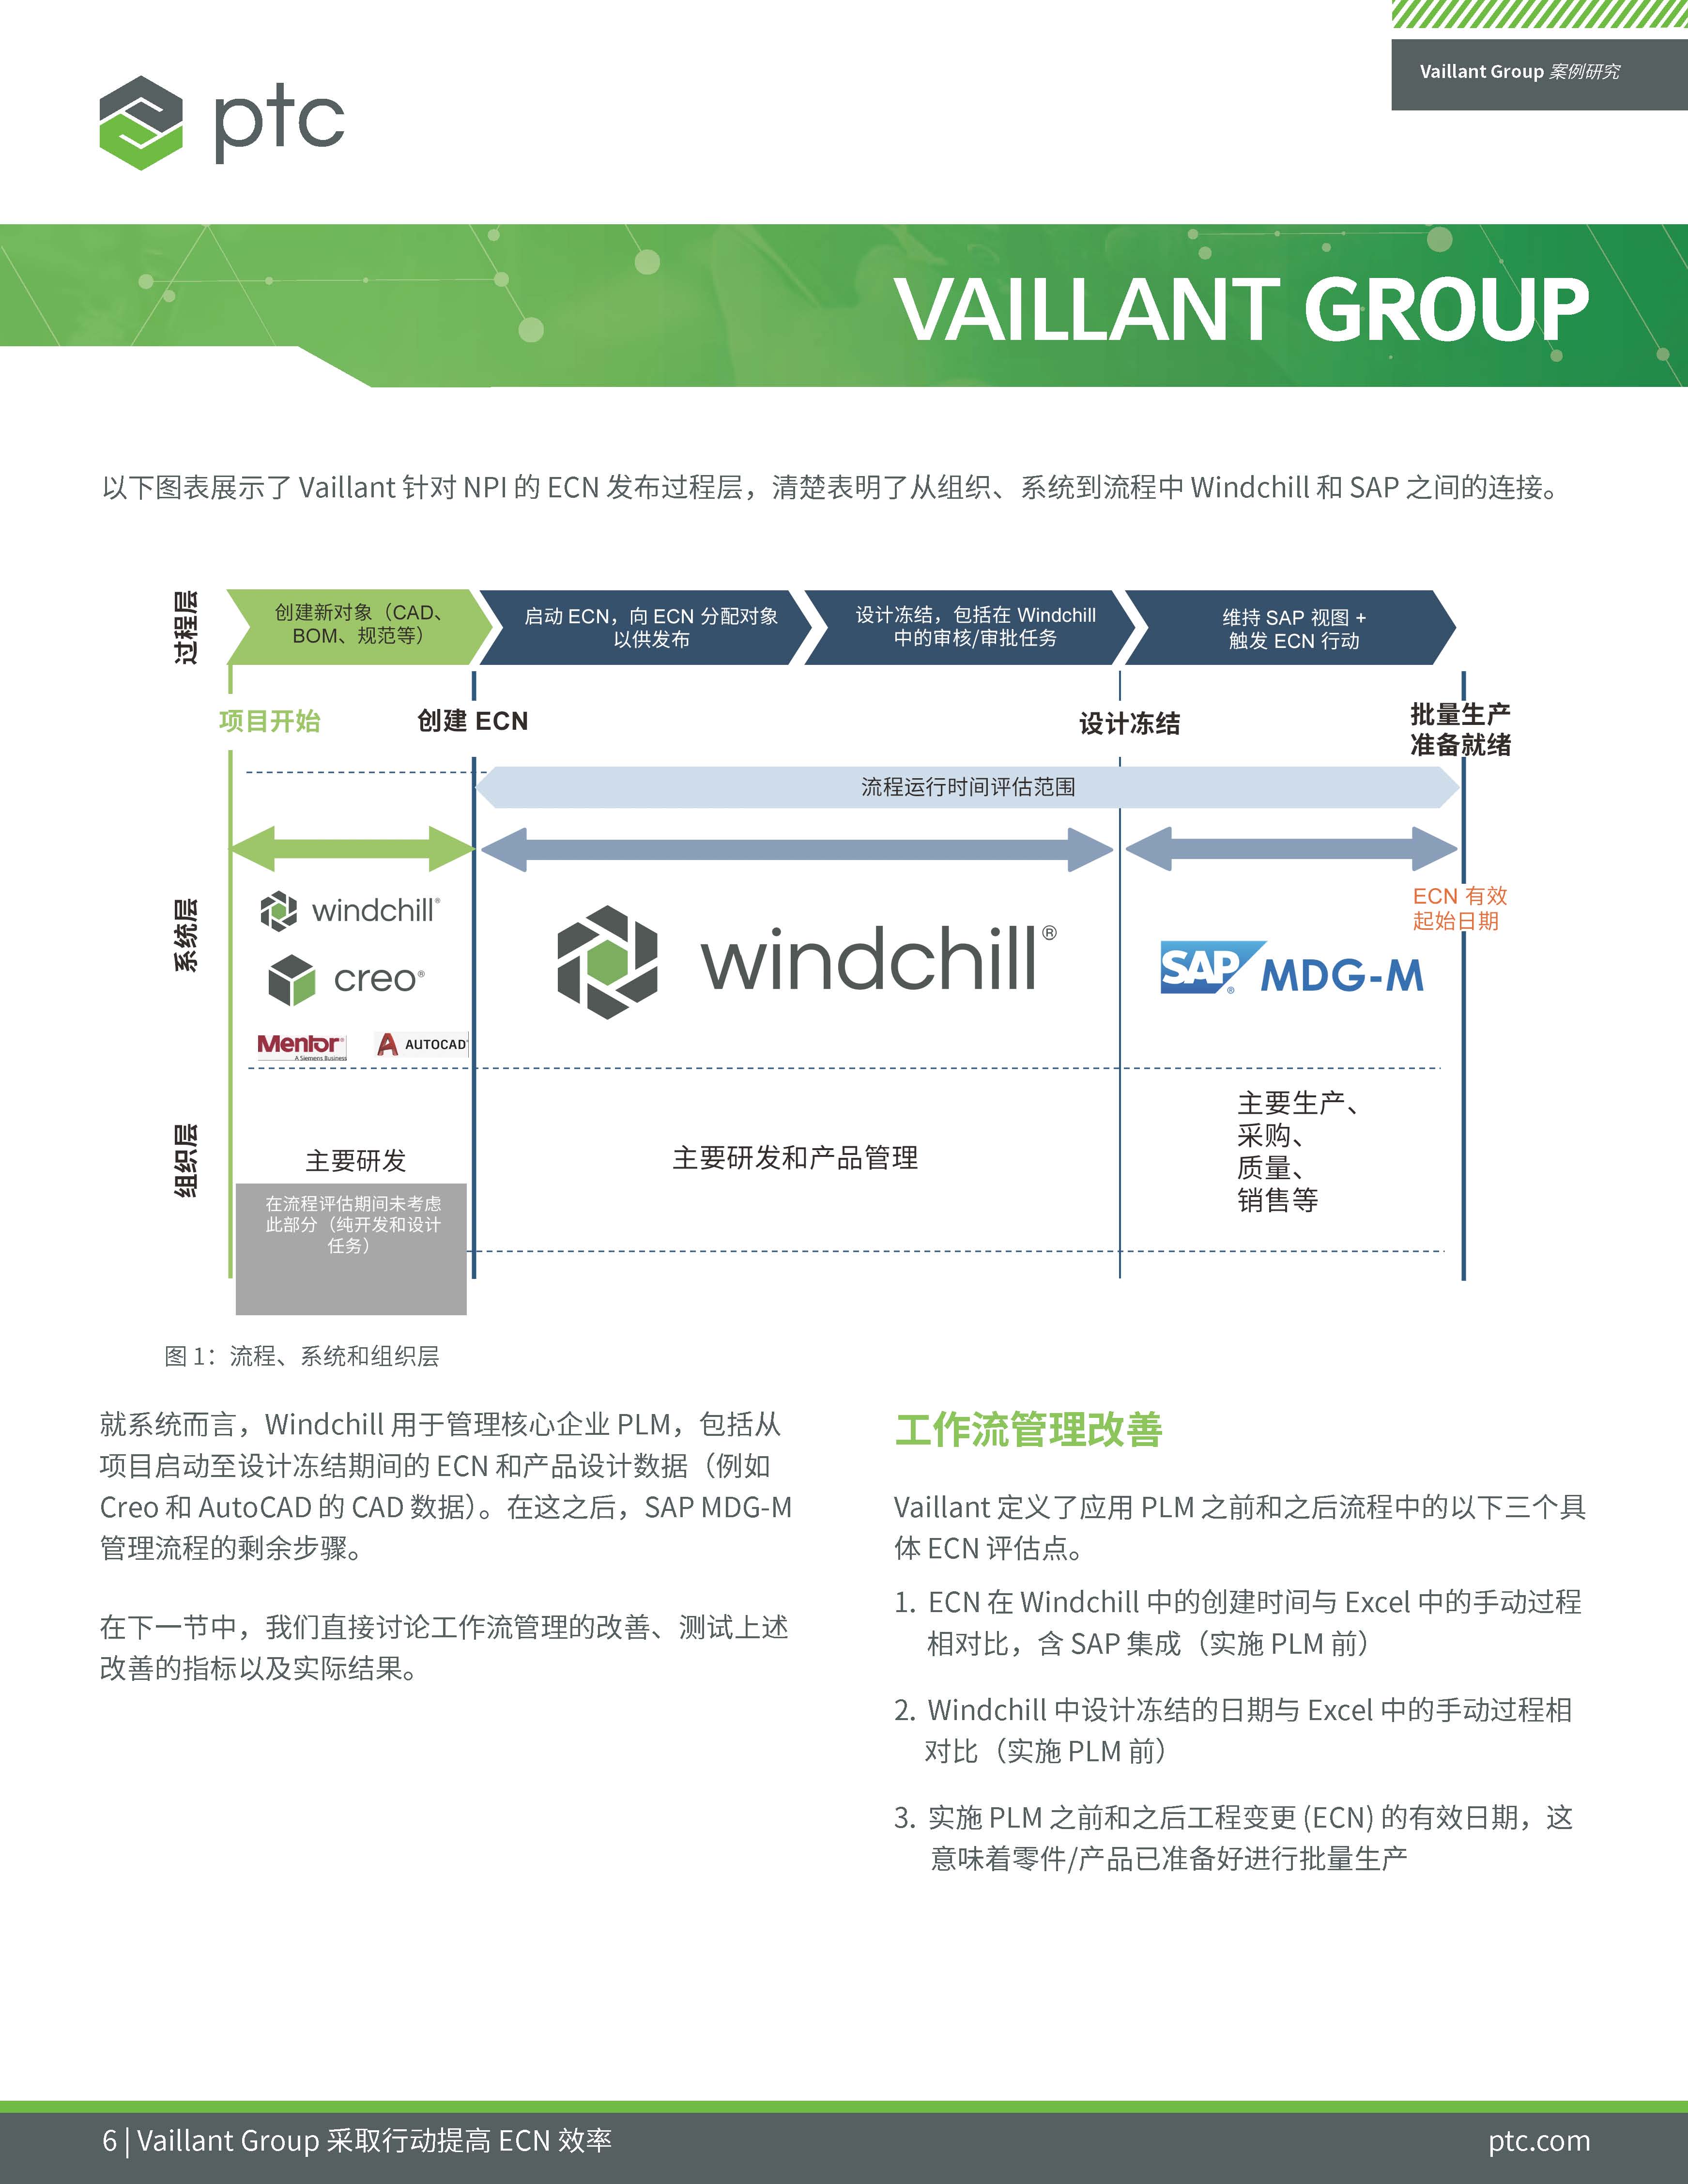 Vaillant Group's Digital Transformation (Chinese)_页面_06.jpg